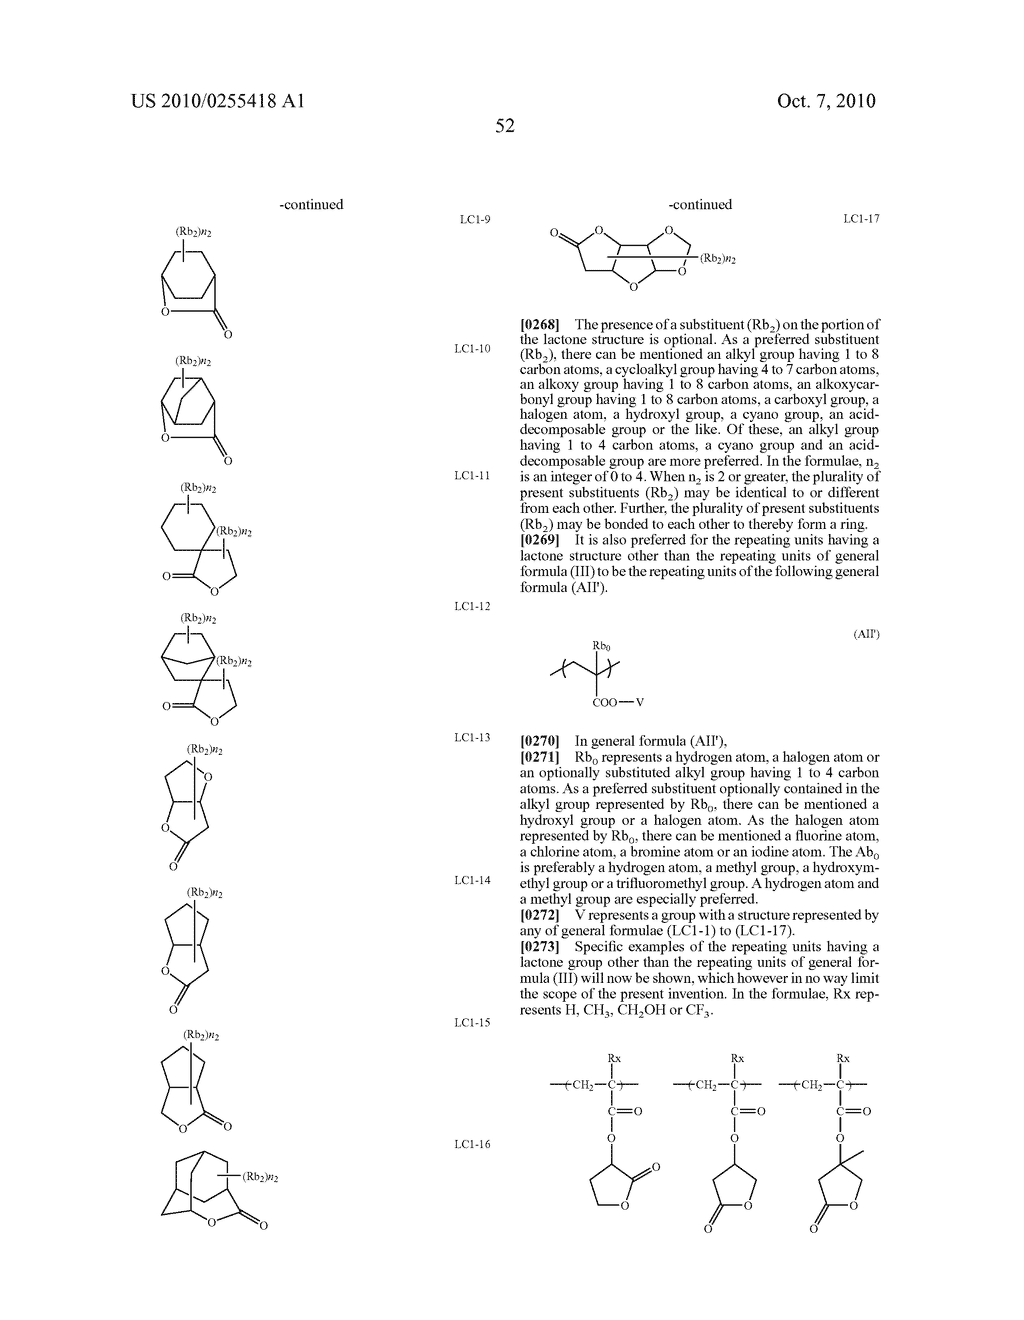 ACTINIC-RAY- OR RADIATION-SENSITIVE RESIN COMPOSITION AND METHOD OF FORMING PATTERN THEREWITH - diagram, schematic, and image 56